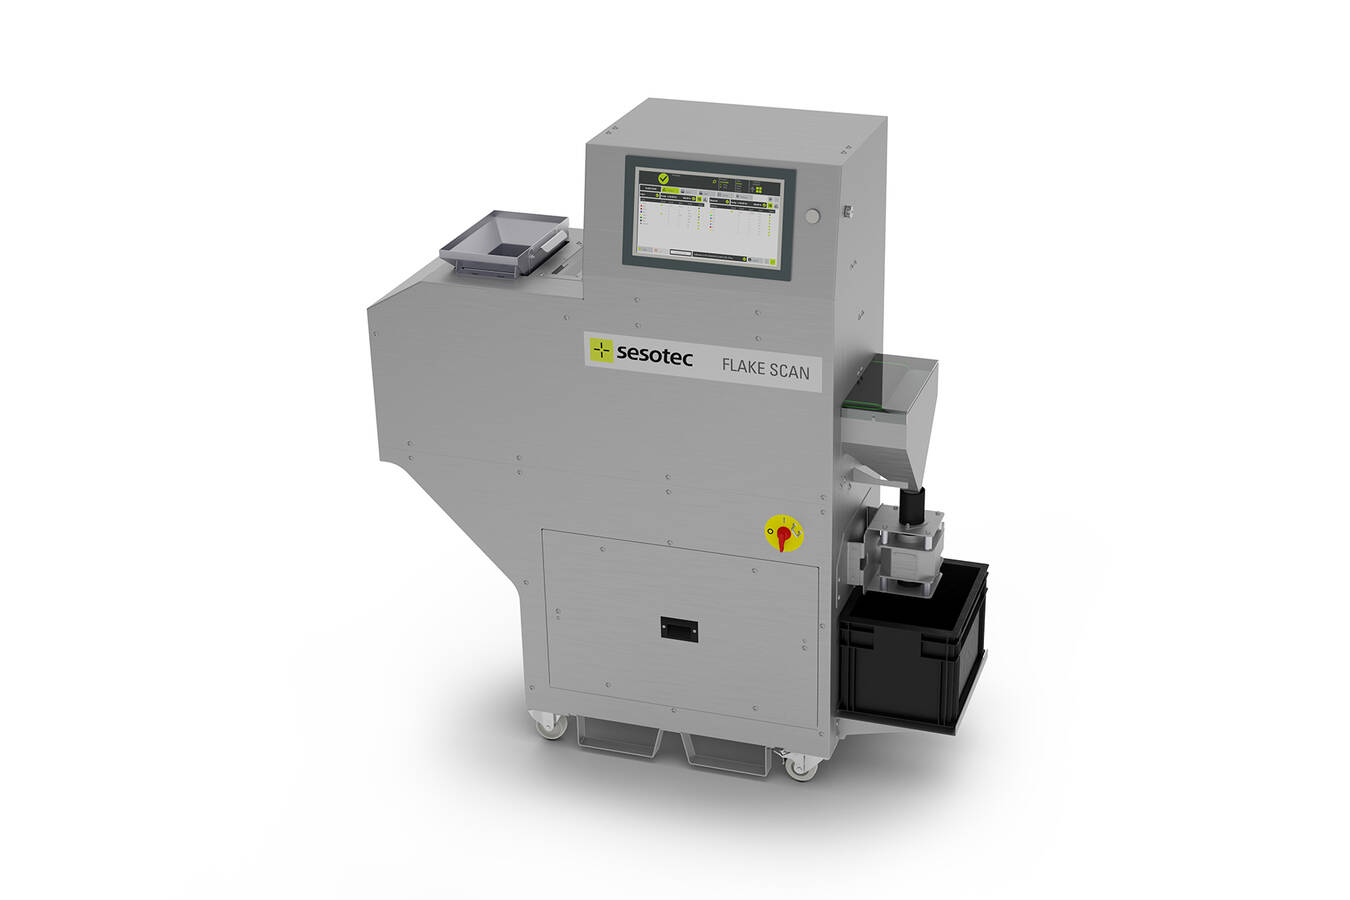 Use FLAKE SCAN by Sesotec to quickly and confidently assess the quality of plastic flakes and regrind. (Photo: Sesotec GmbH)